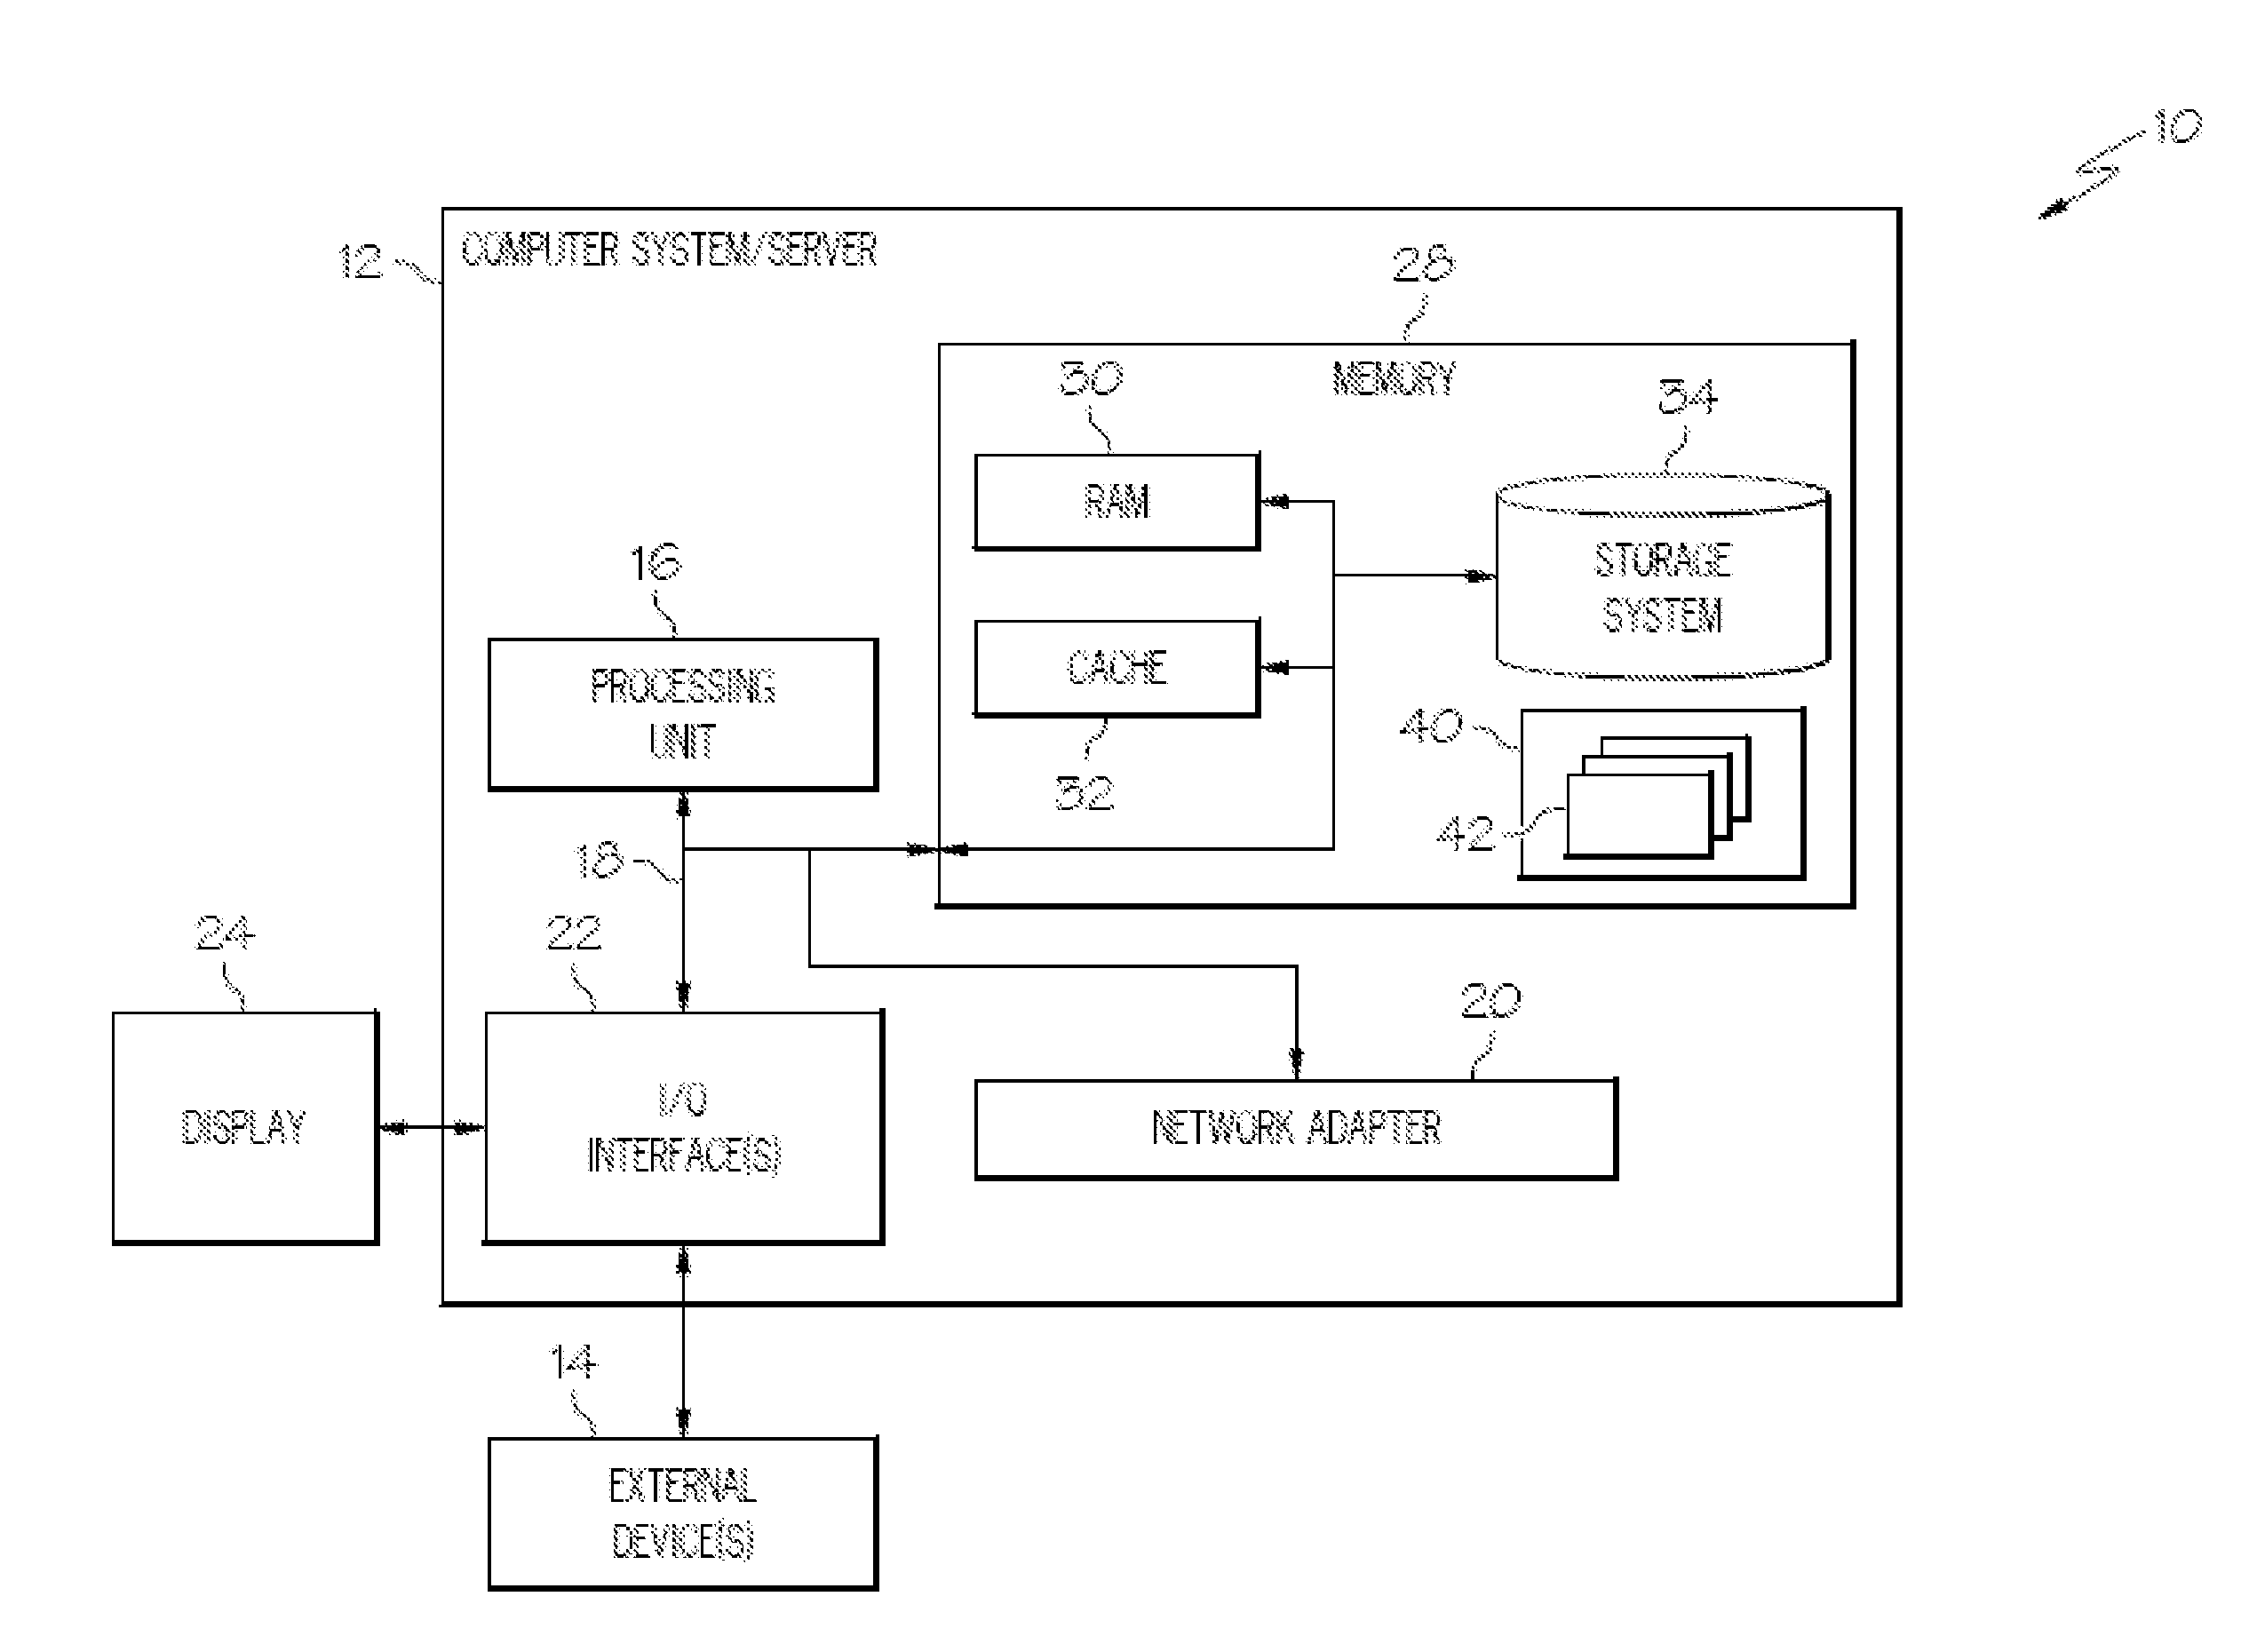 Virtual machine-based sound control for computerized devices in a networked computing environment